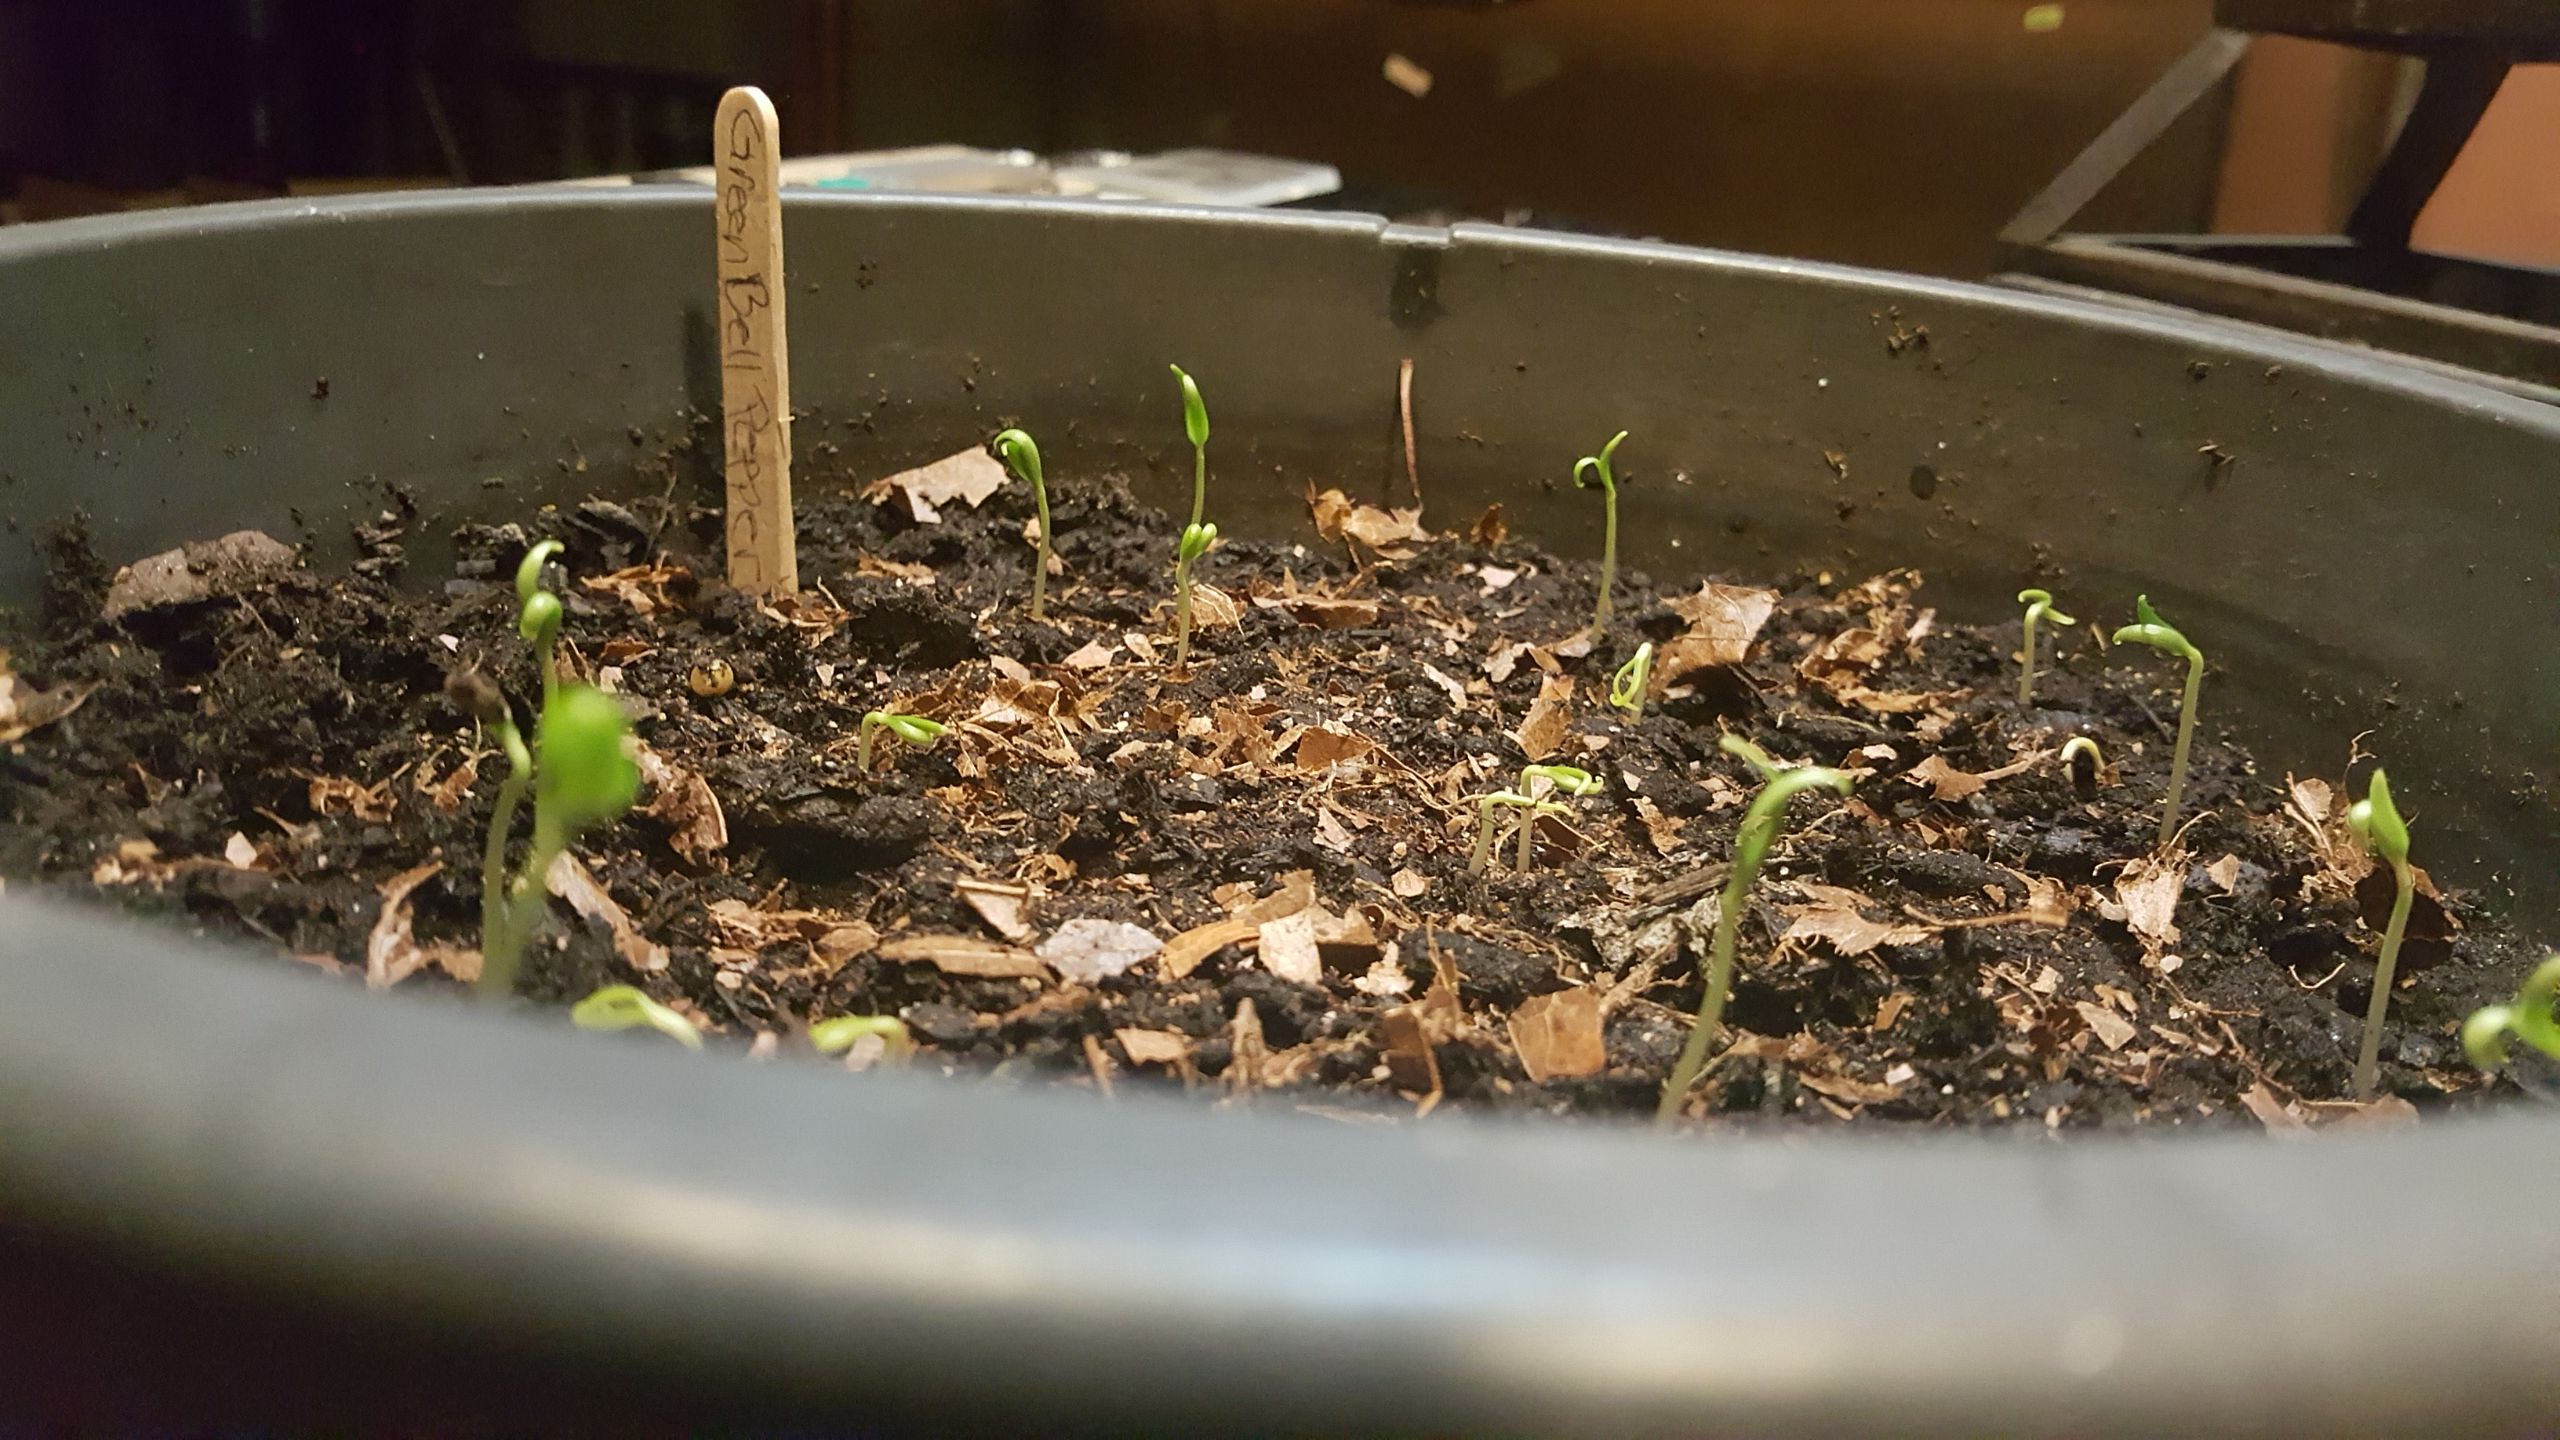 Growing plants from seeds